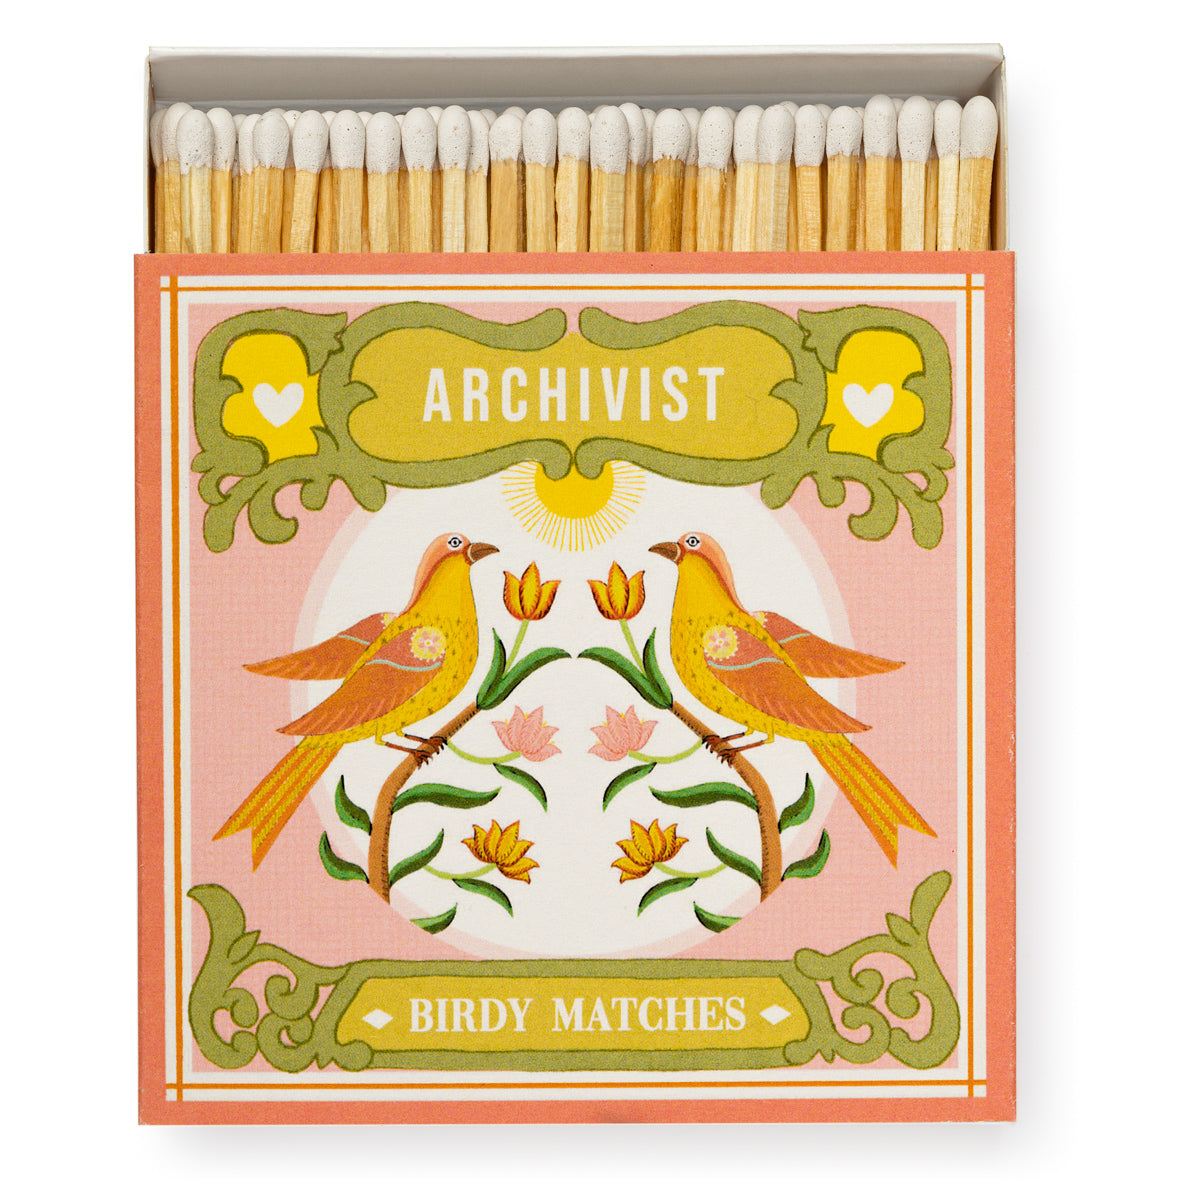 Long Matches - Square Box | Ariane's Birdy Matches | by Archivist - Lifestory